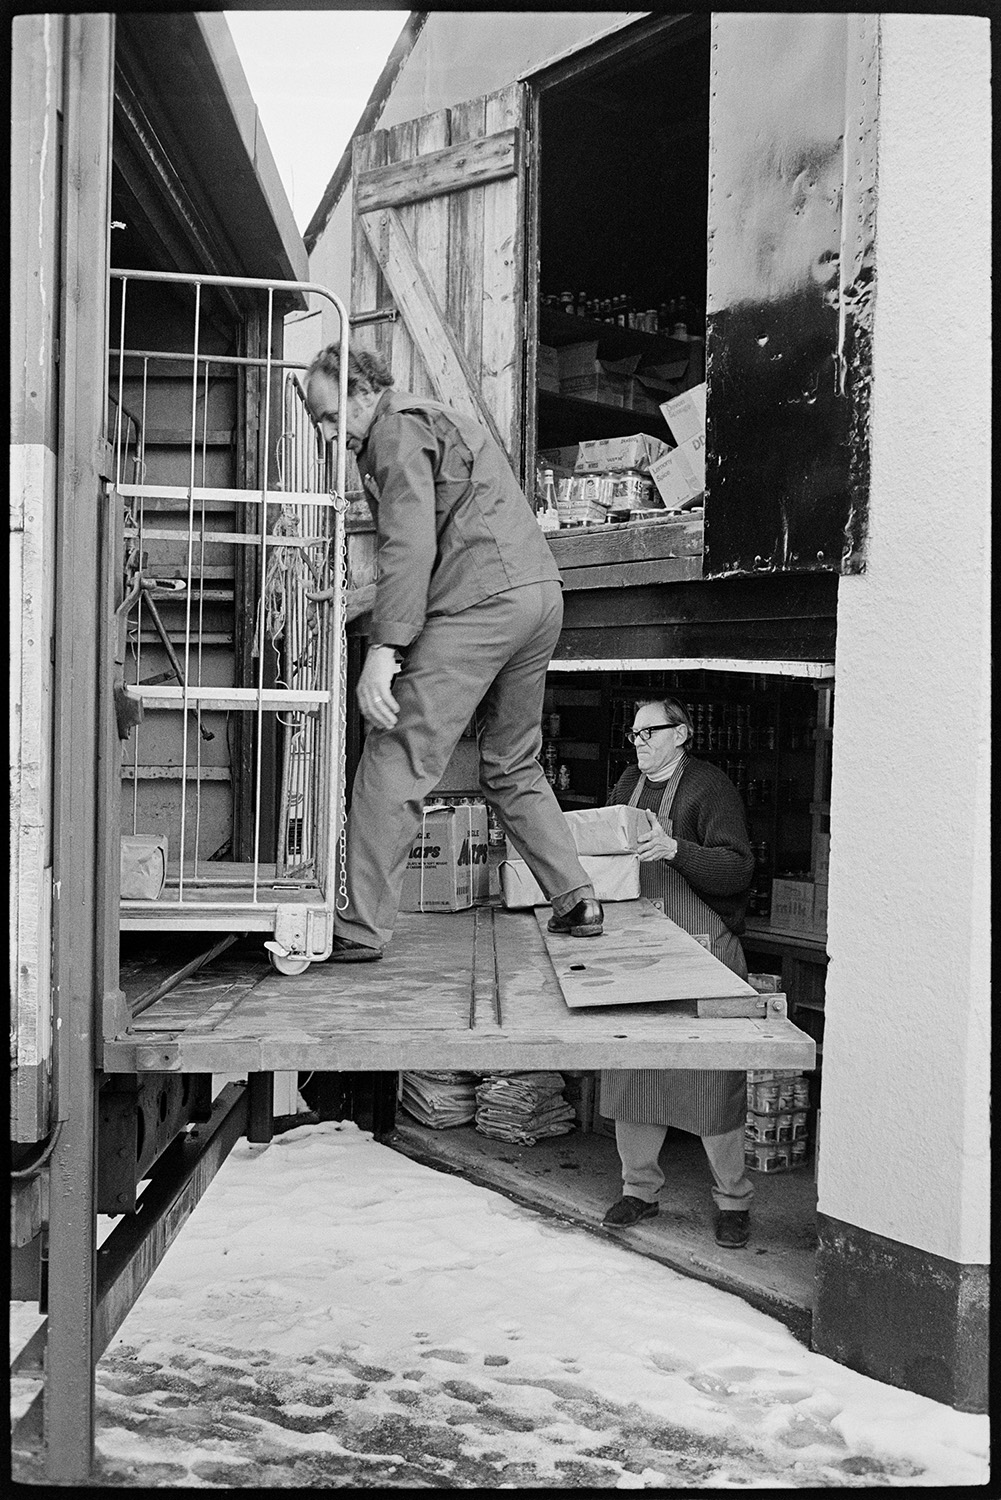 Man unloading groceries from back of lorry. 
[Two men unloading groceries from a lorry and loading them into a store or warehouse in Church Street, Dolton.]